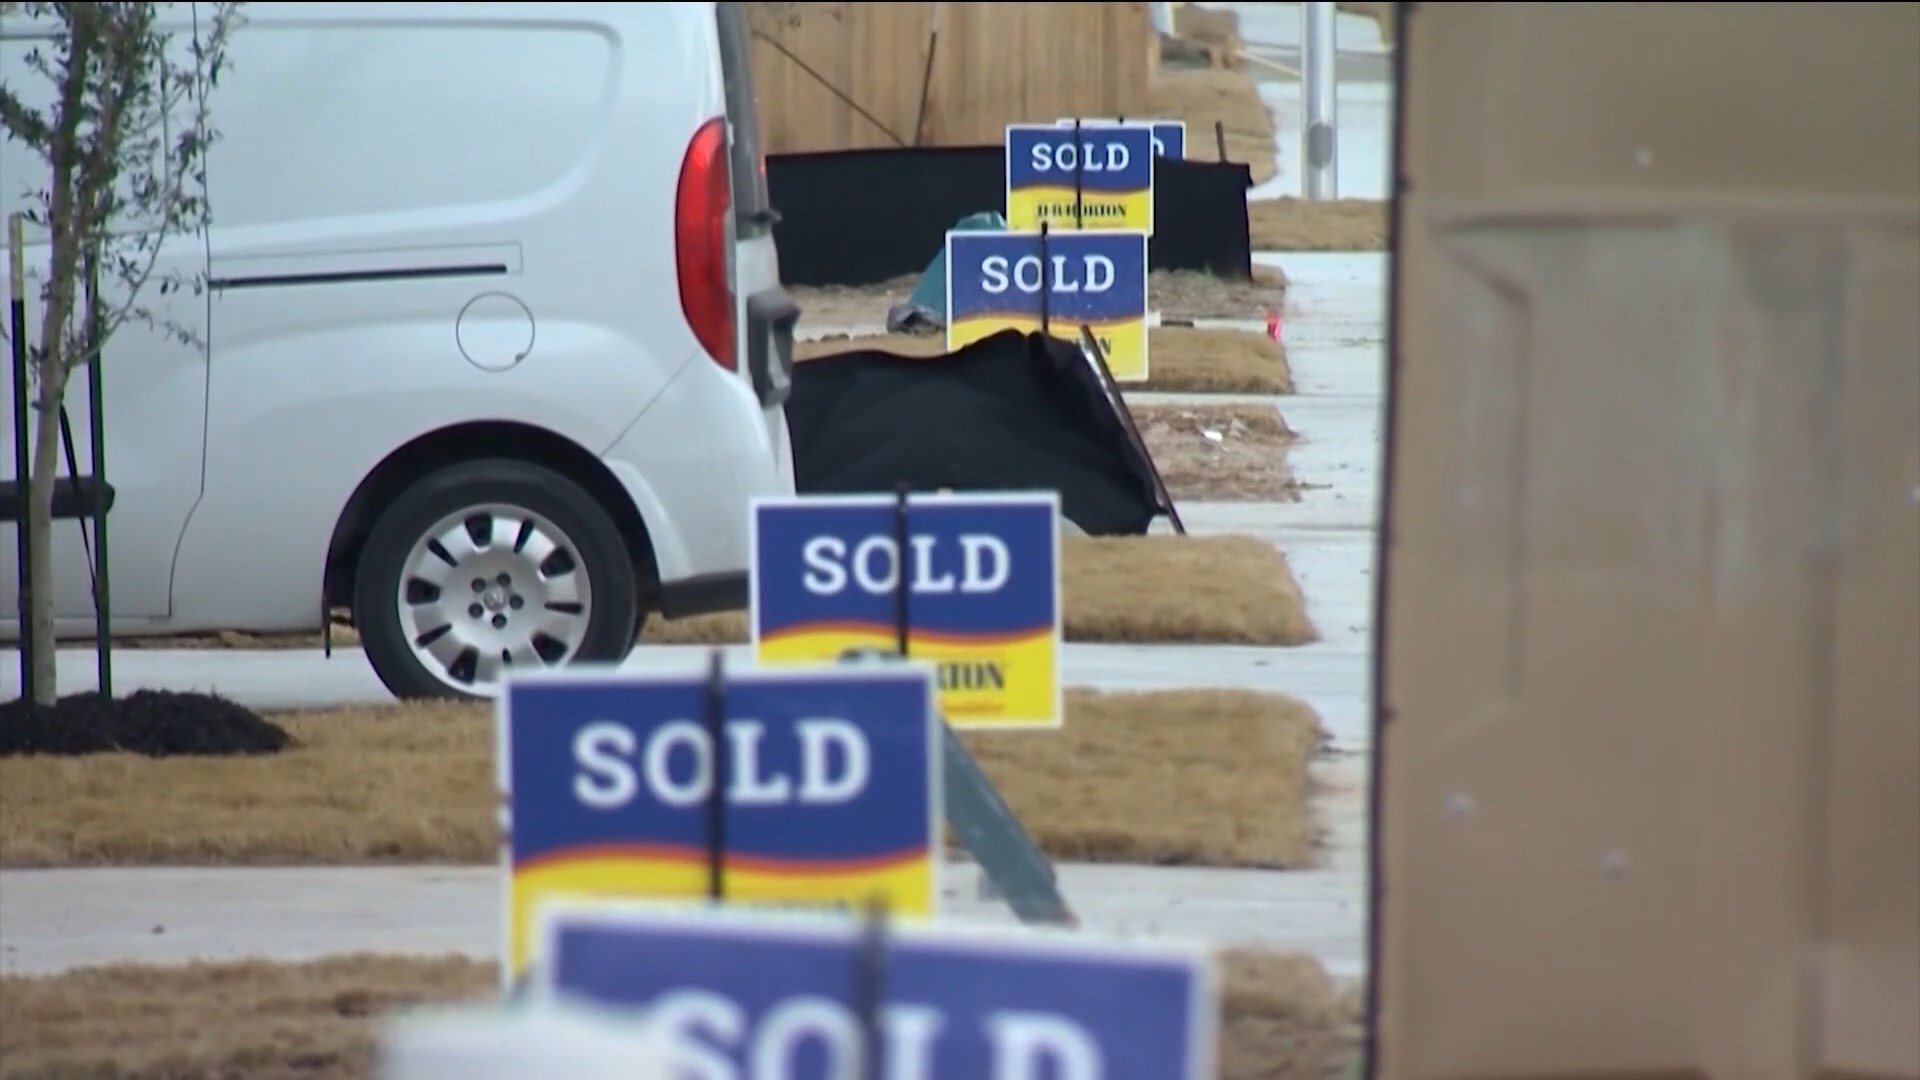 The National Association of Realtors has clarified some details about a recent lawsuit settlement that will bring changes to the real estate industry.